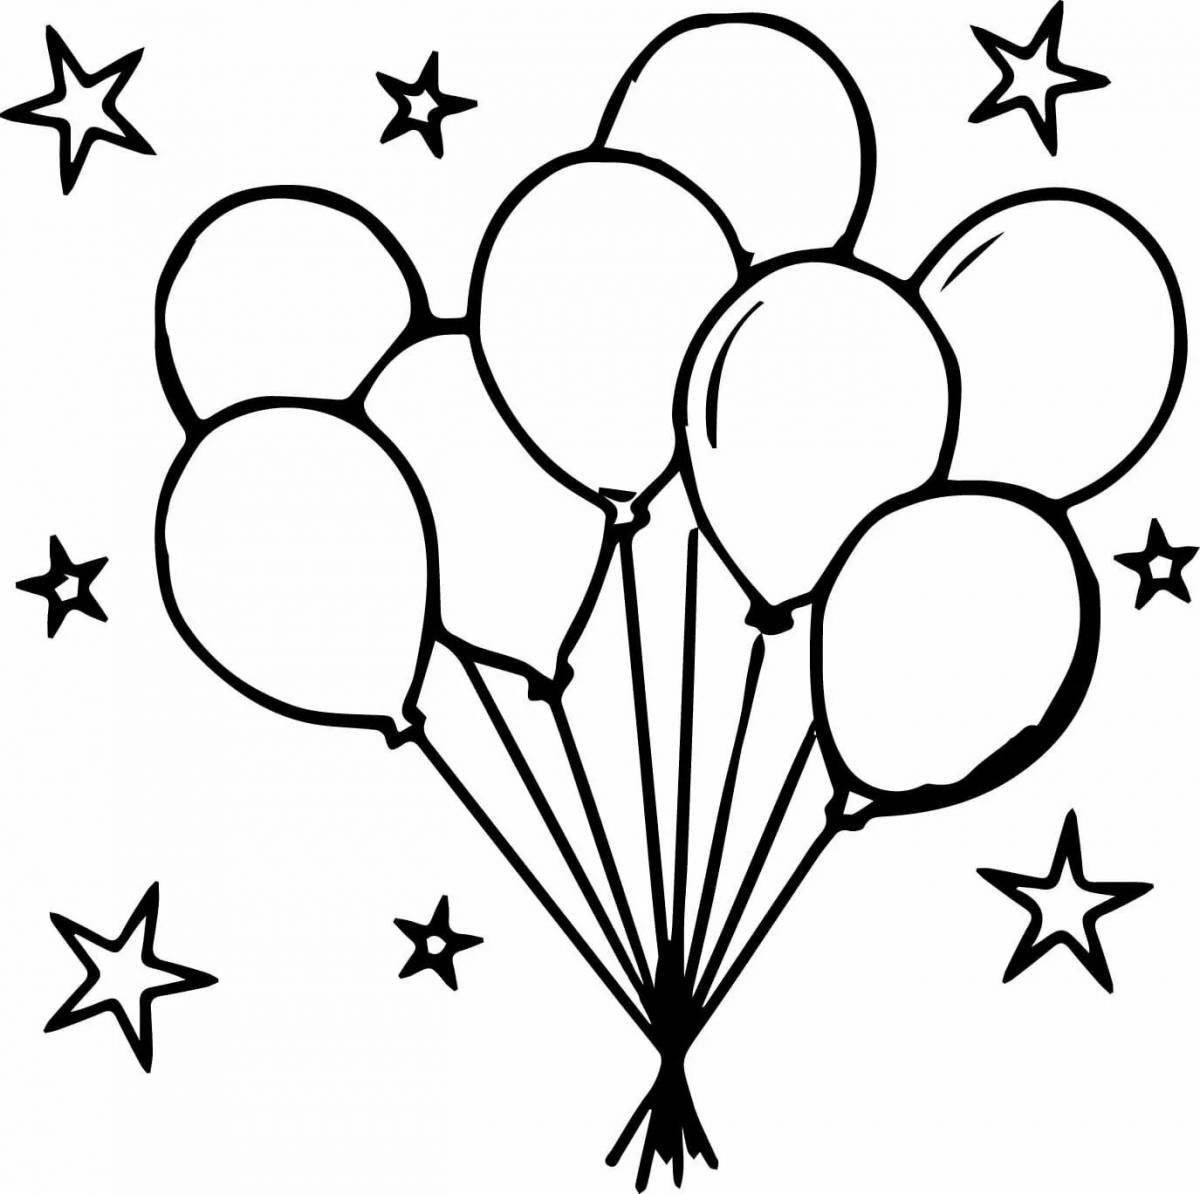 Adorable balloon coloring book for 3-4 year olds